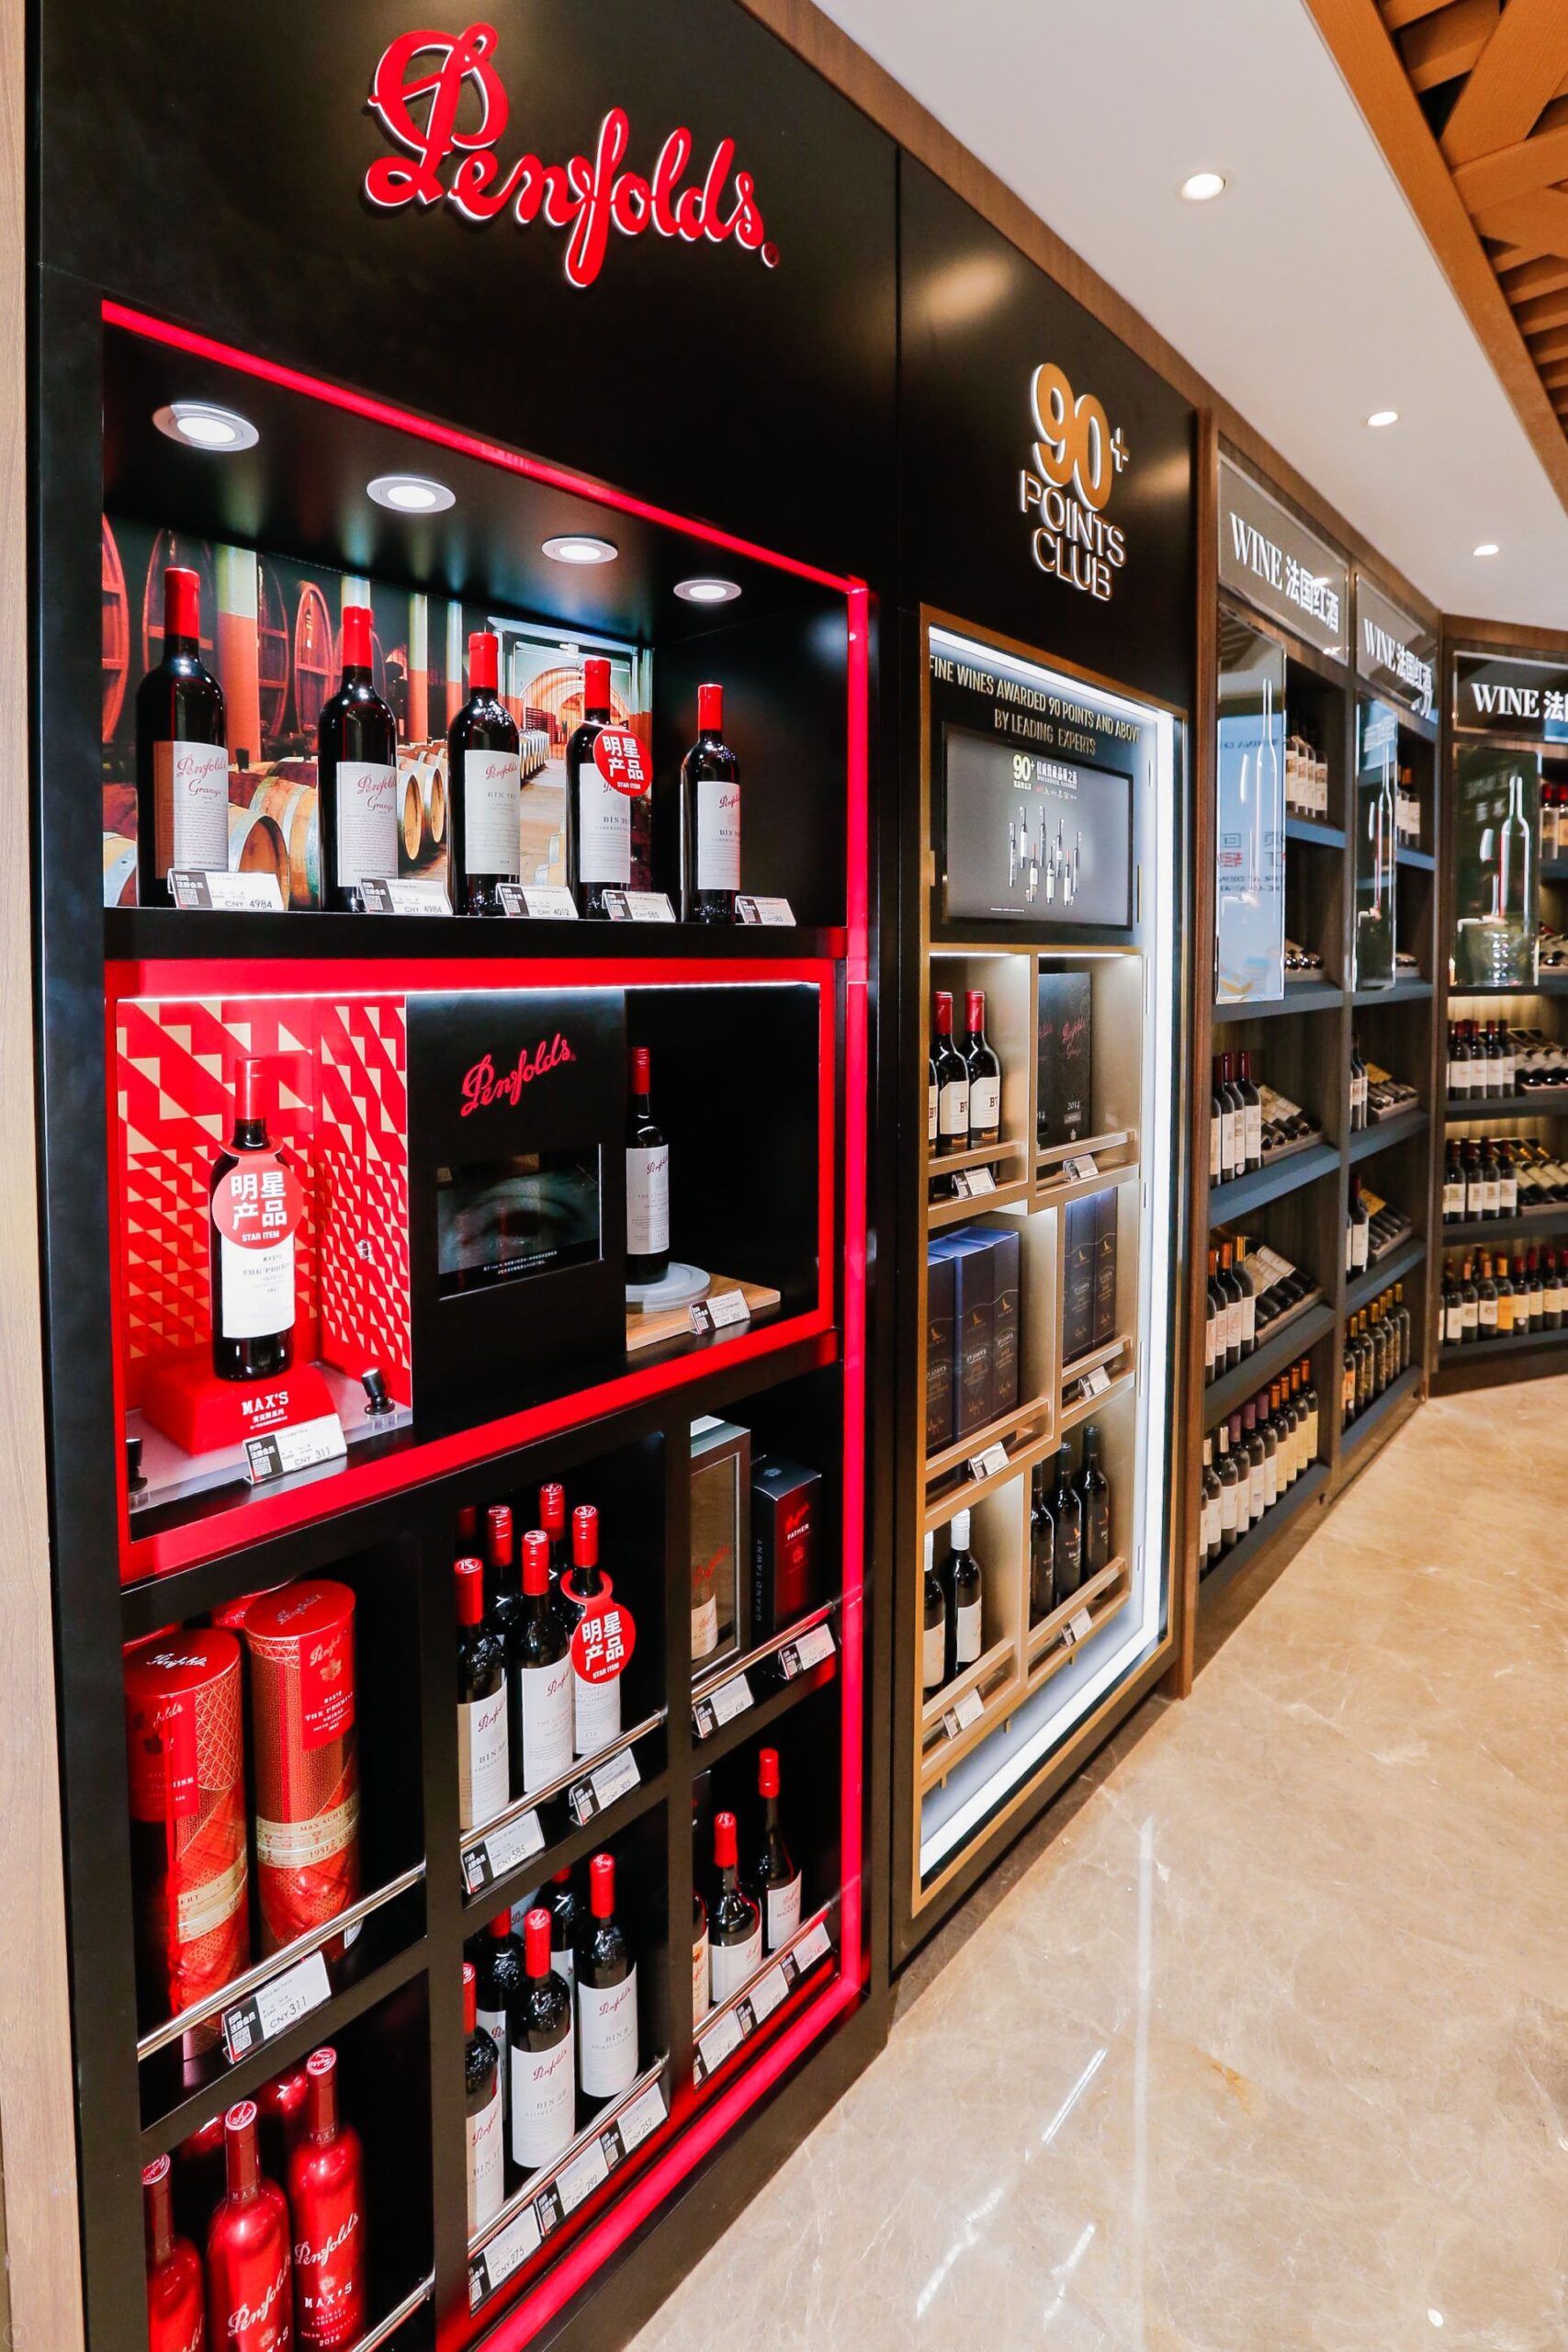 A key milestone for China's duty free industry' – CDFG unveils